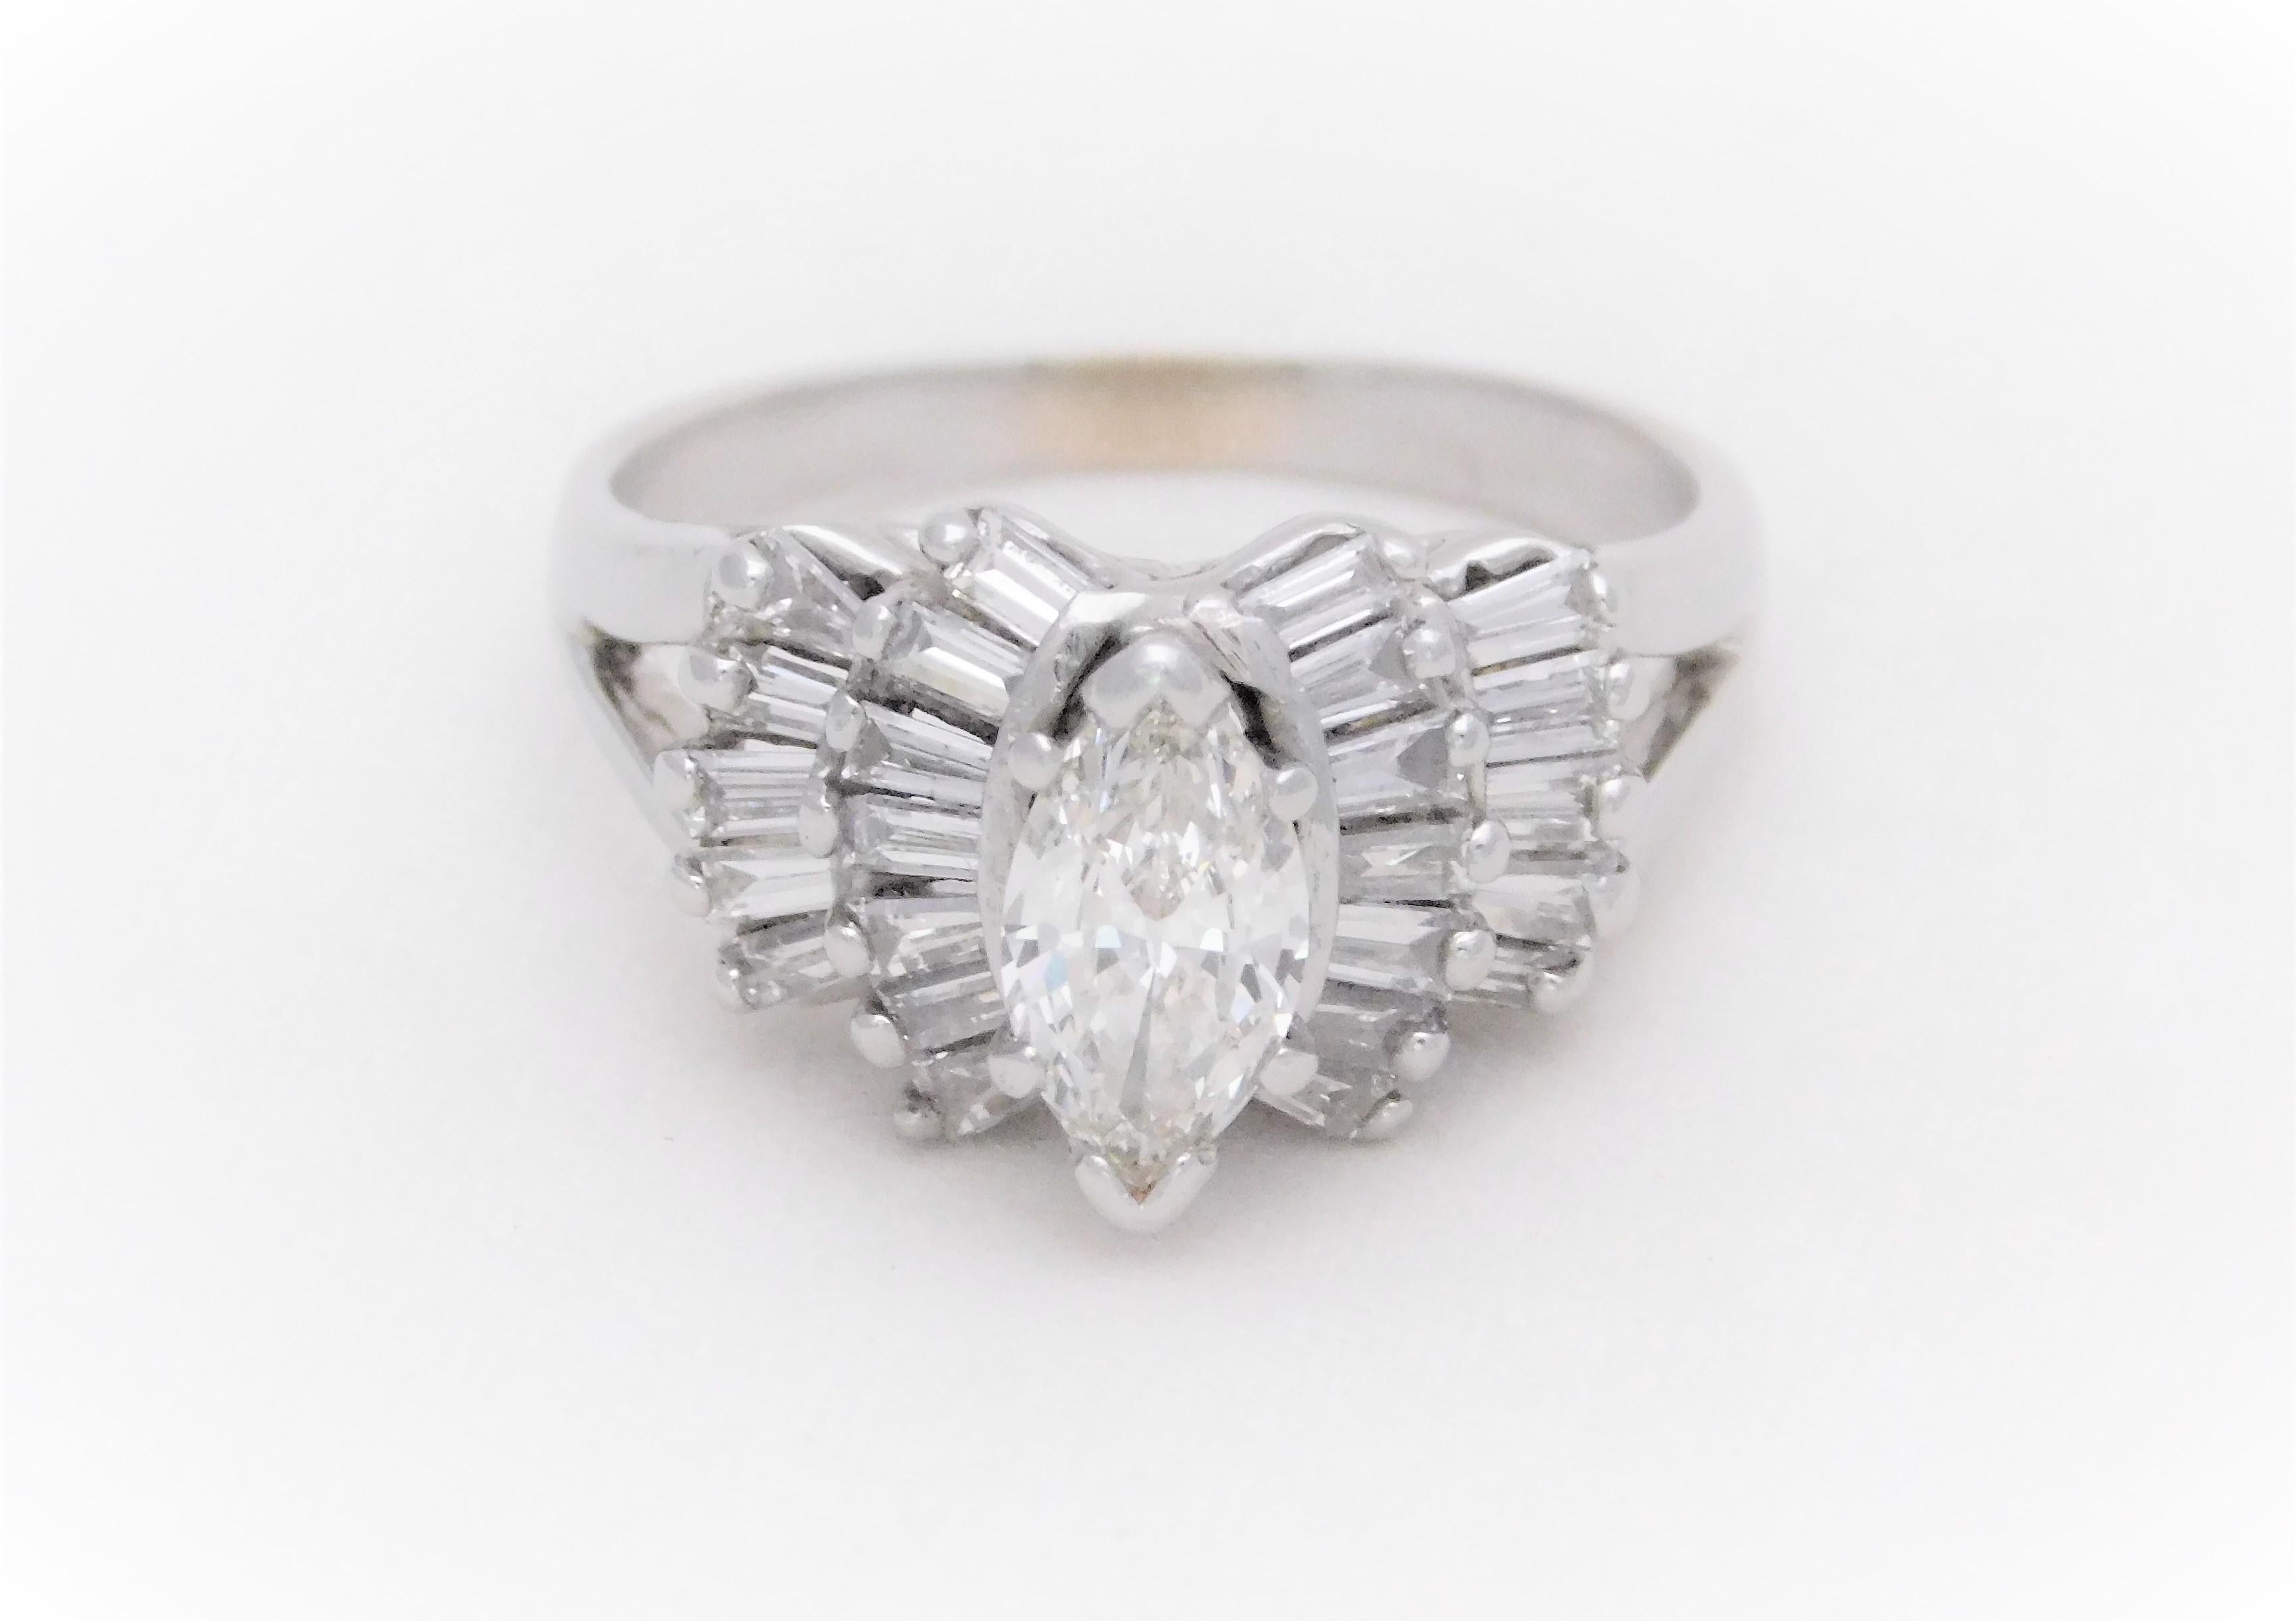 From a delightful Southern estate.  This cocktail-style ring has been crafted in solid 14k white gold.  The design is an elegant take on a vintage dinner ring.  It features an immaculate natural marquise-cut diamond, approximating 0.75ct, as its